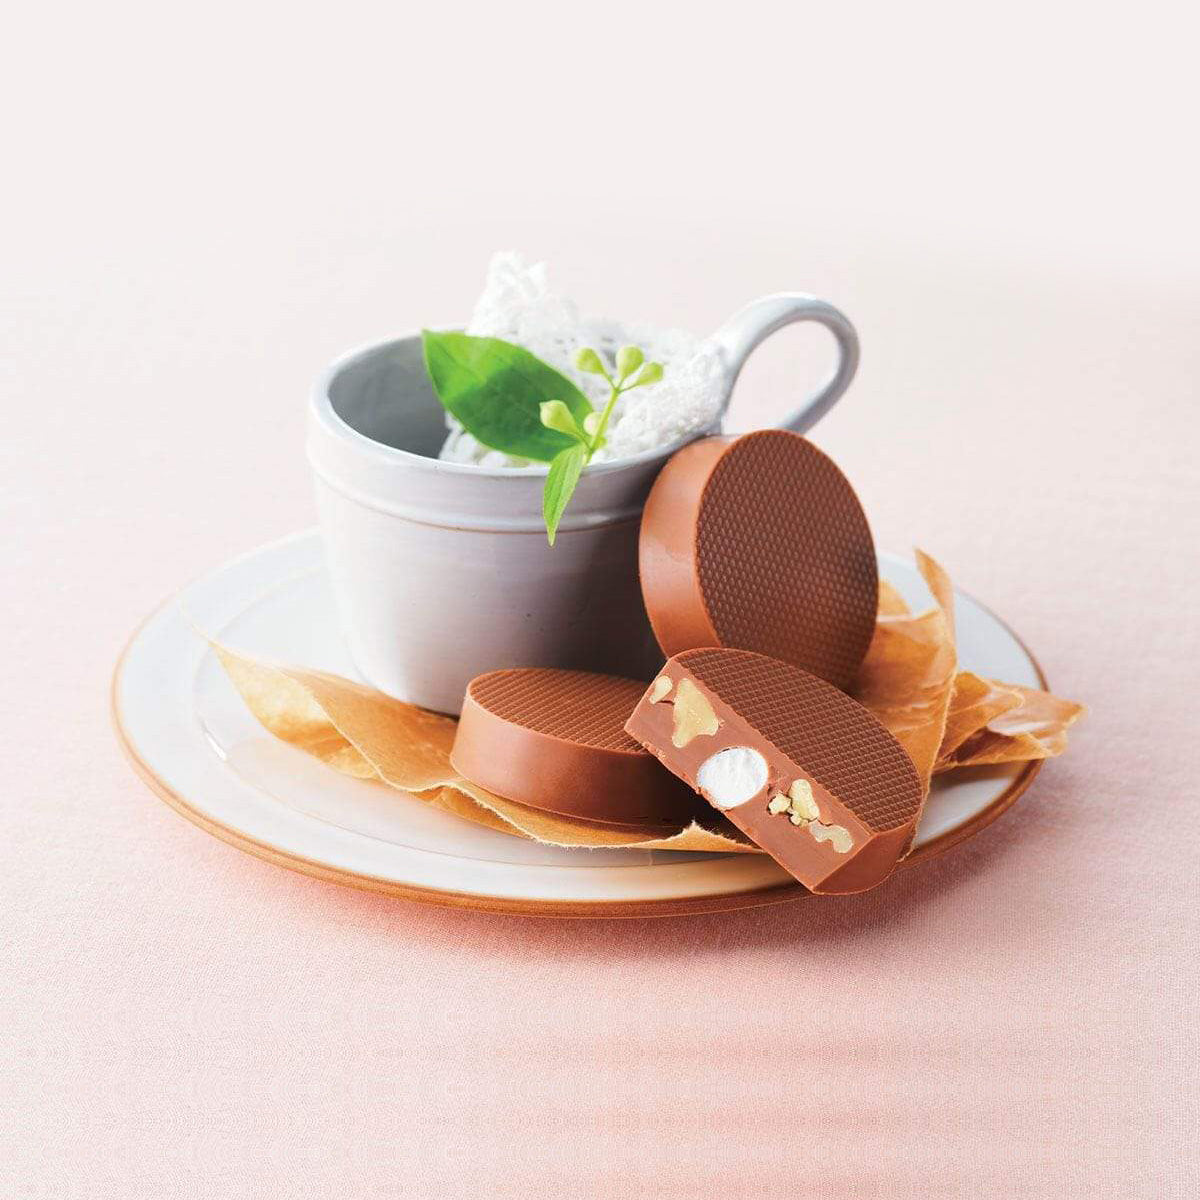 ROYCE' Chocolate - Petit Kurumaro Chocolat (5 Pcs) - Image shows brown chocolate discs filled with marshmallows and walnuts on a white plate with brown paper. Accents include a white tea cup and a stem with green leaves and buds. Background is in pink.